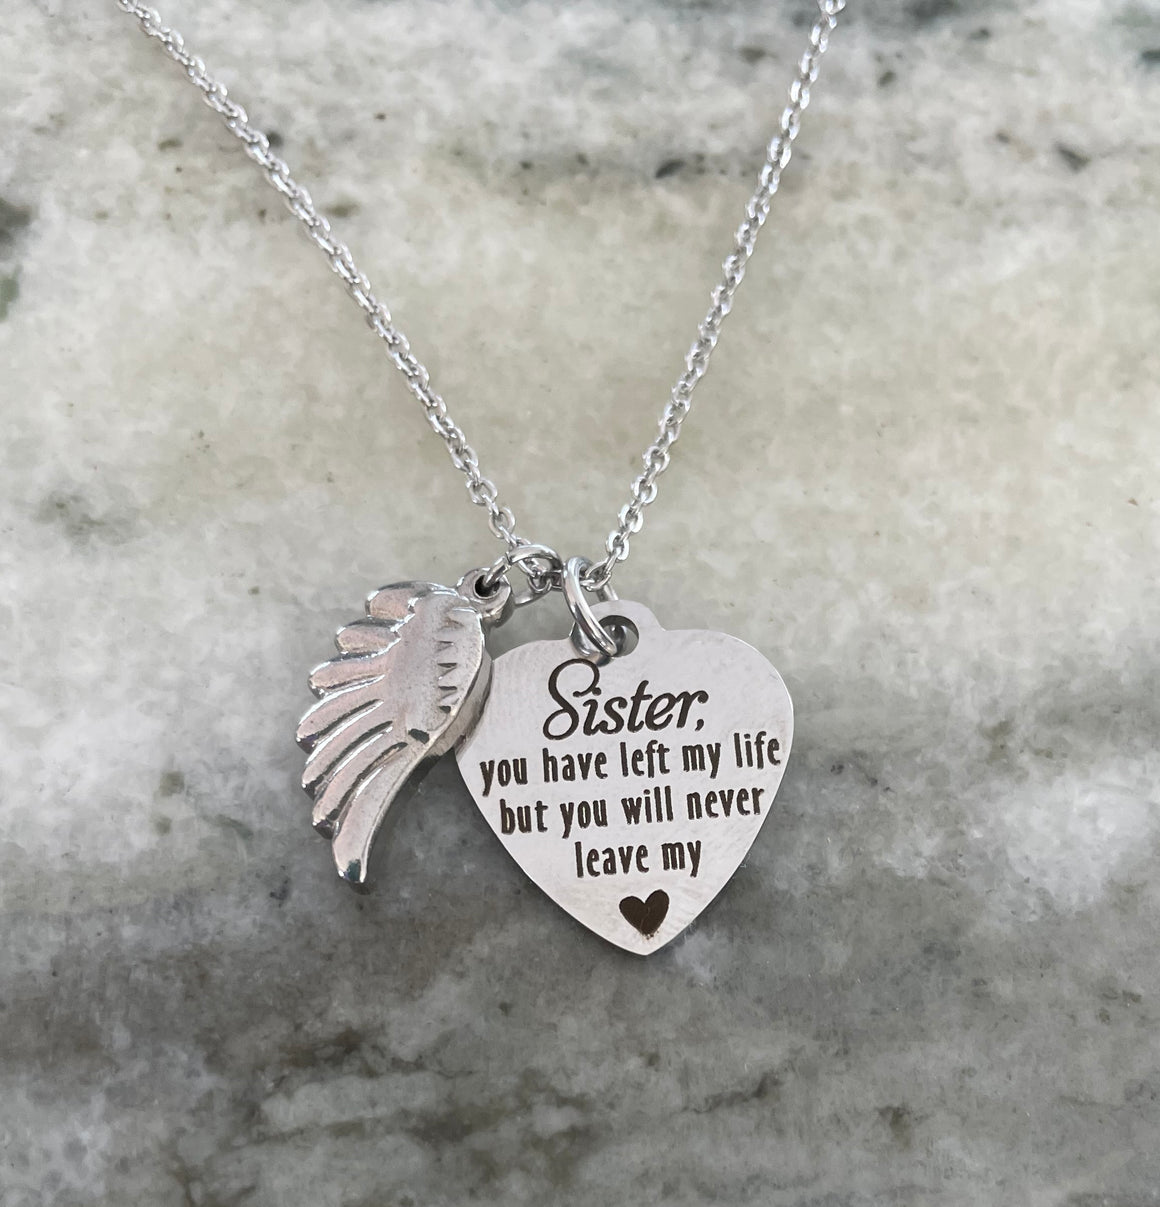 Sister Memorial Necklace Sister Memorial Gift Silver Charm Necklace Gift for Sister's Memorial - Add a FREE Birthstone Charm